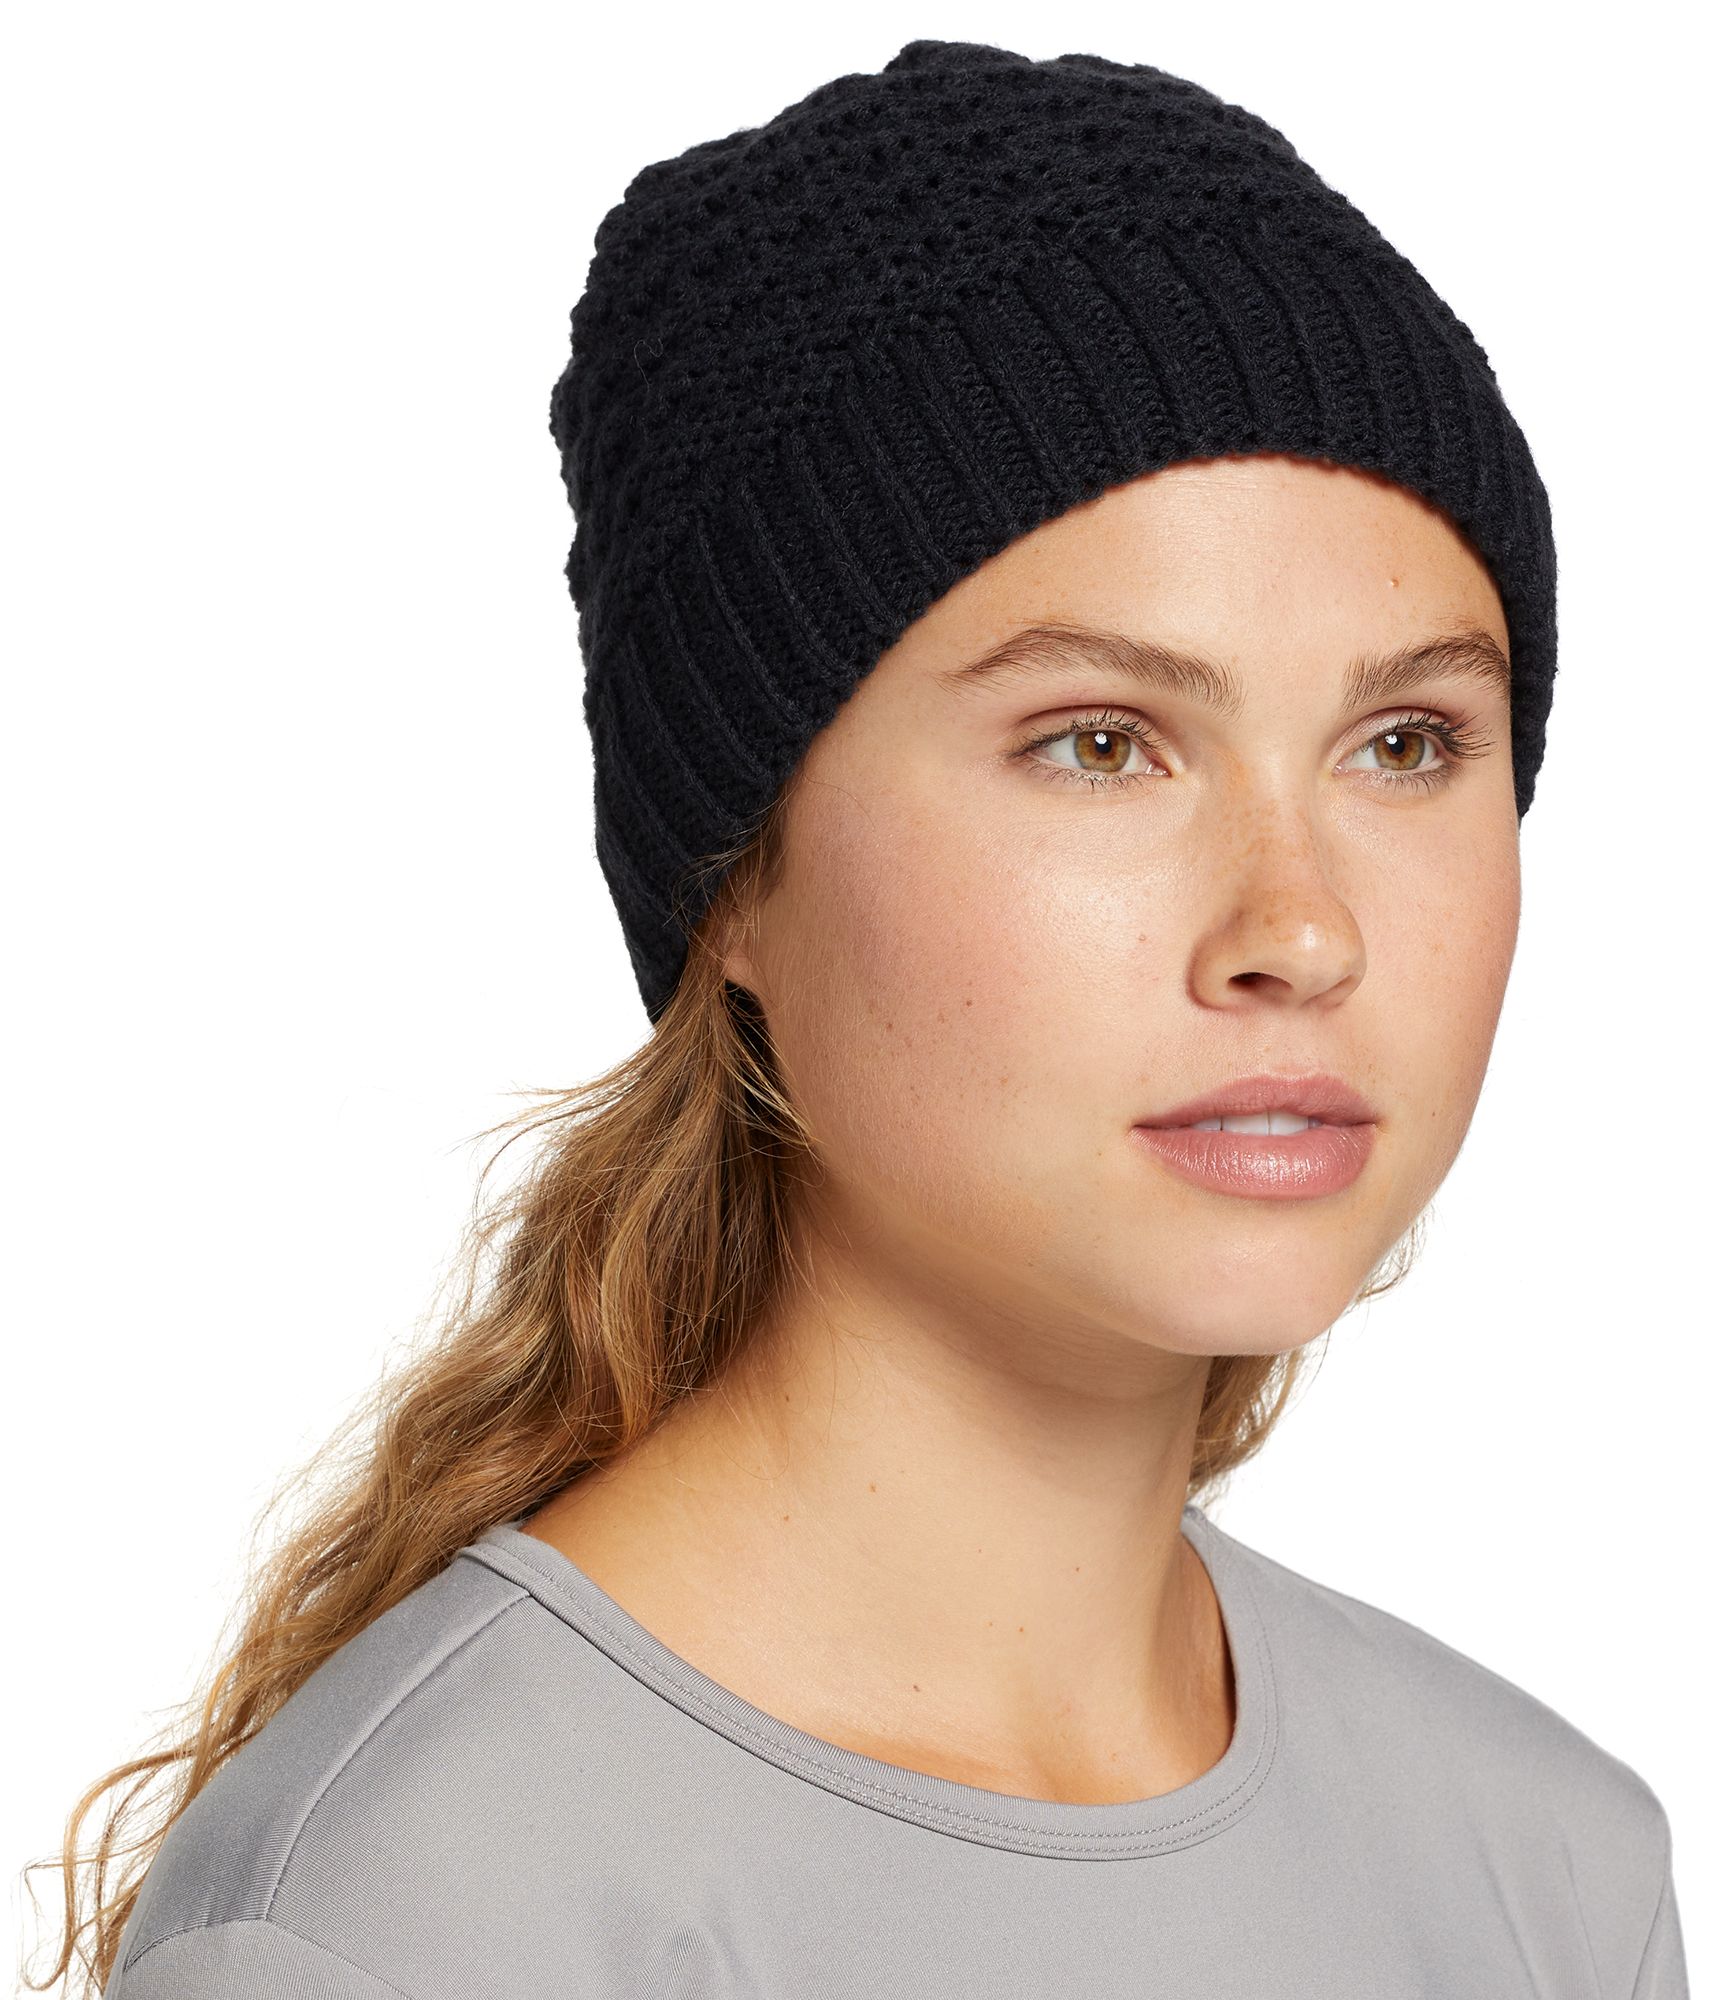 Northeast Outfitters Womens Bead Stitch Beanie